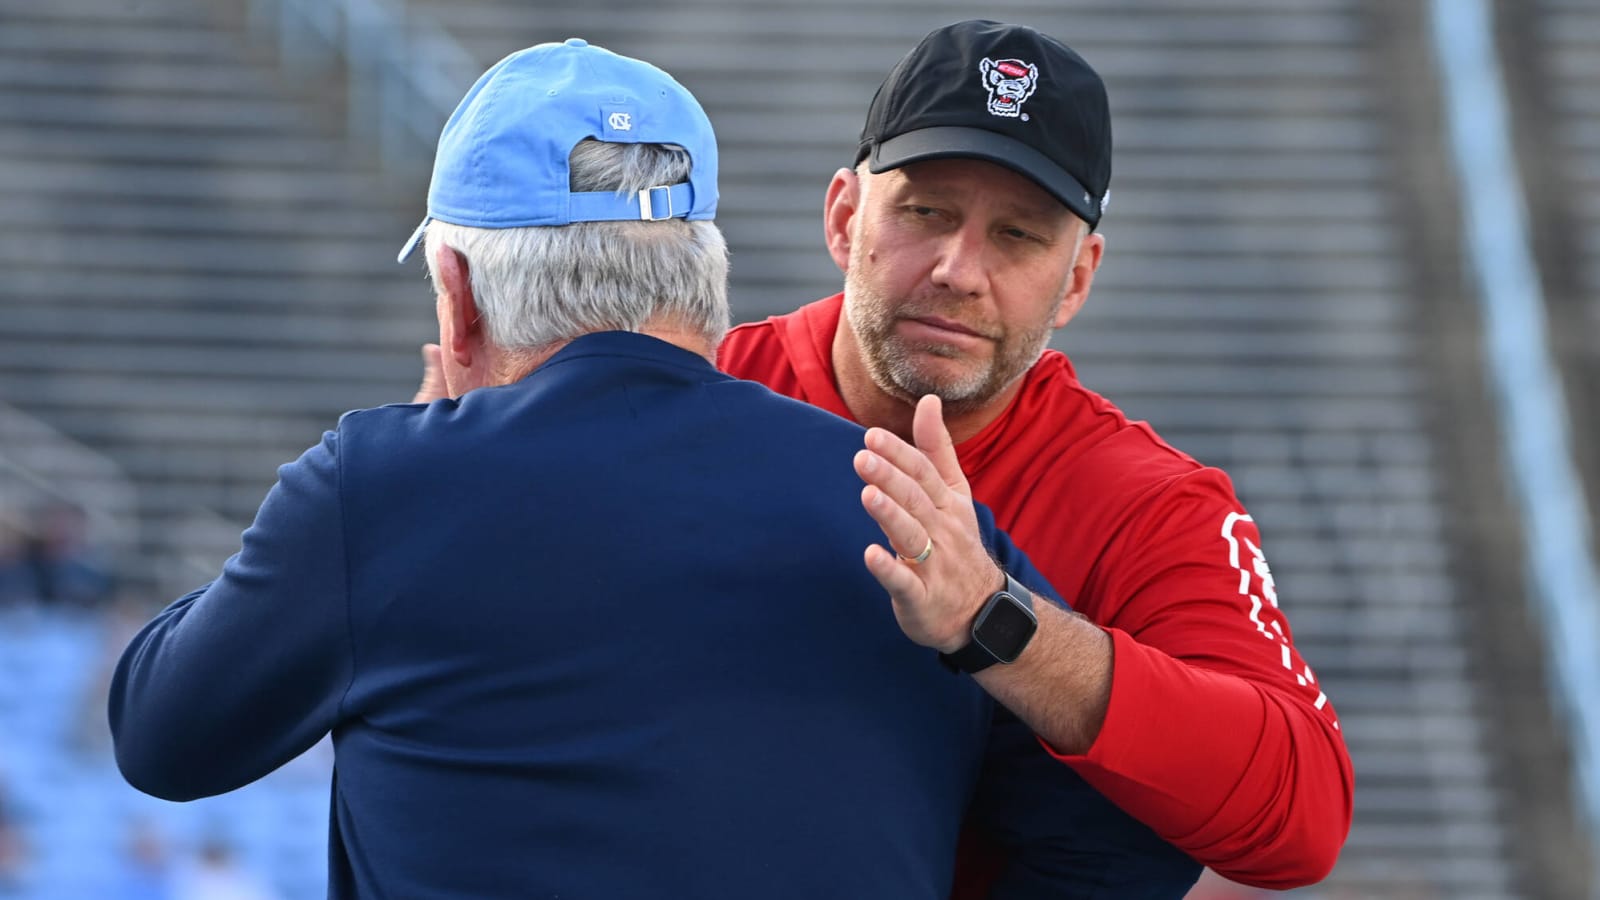 Dave Doeren had savage quote about rival North Carolina